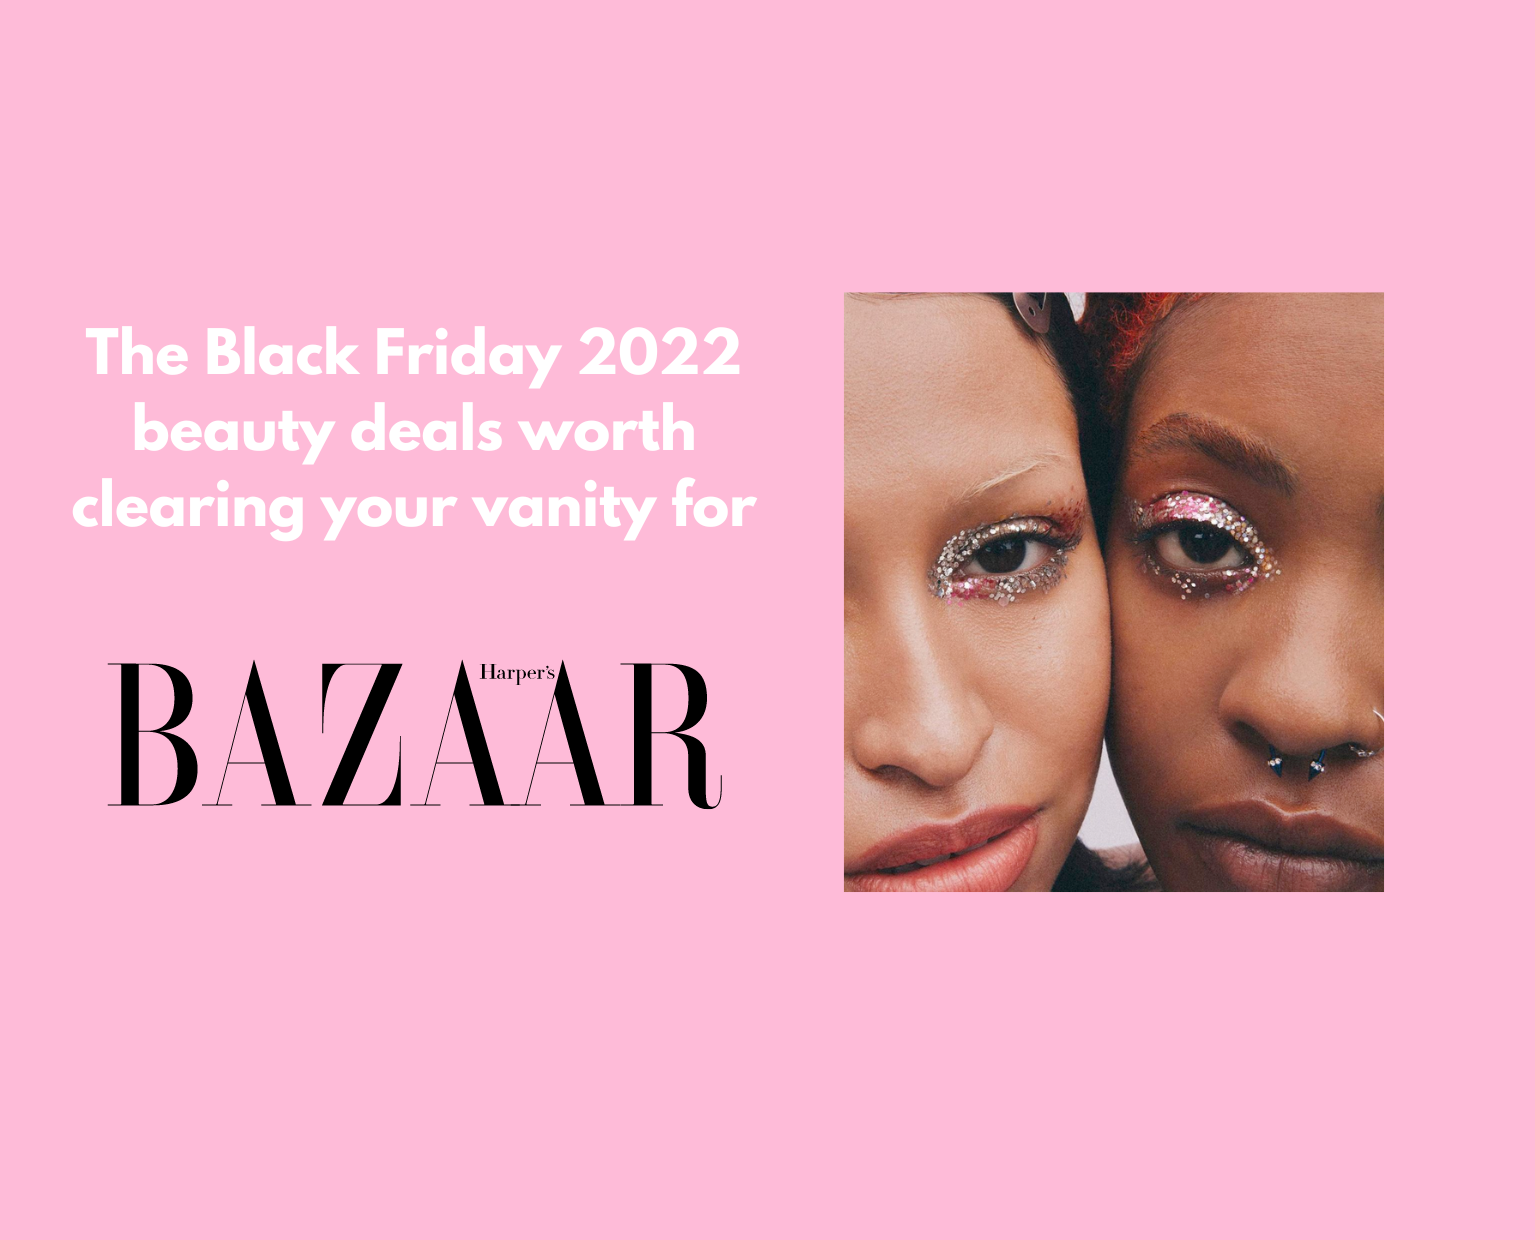 The Black Friday 2022 beauty deals worth clearing your vanity for